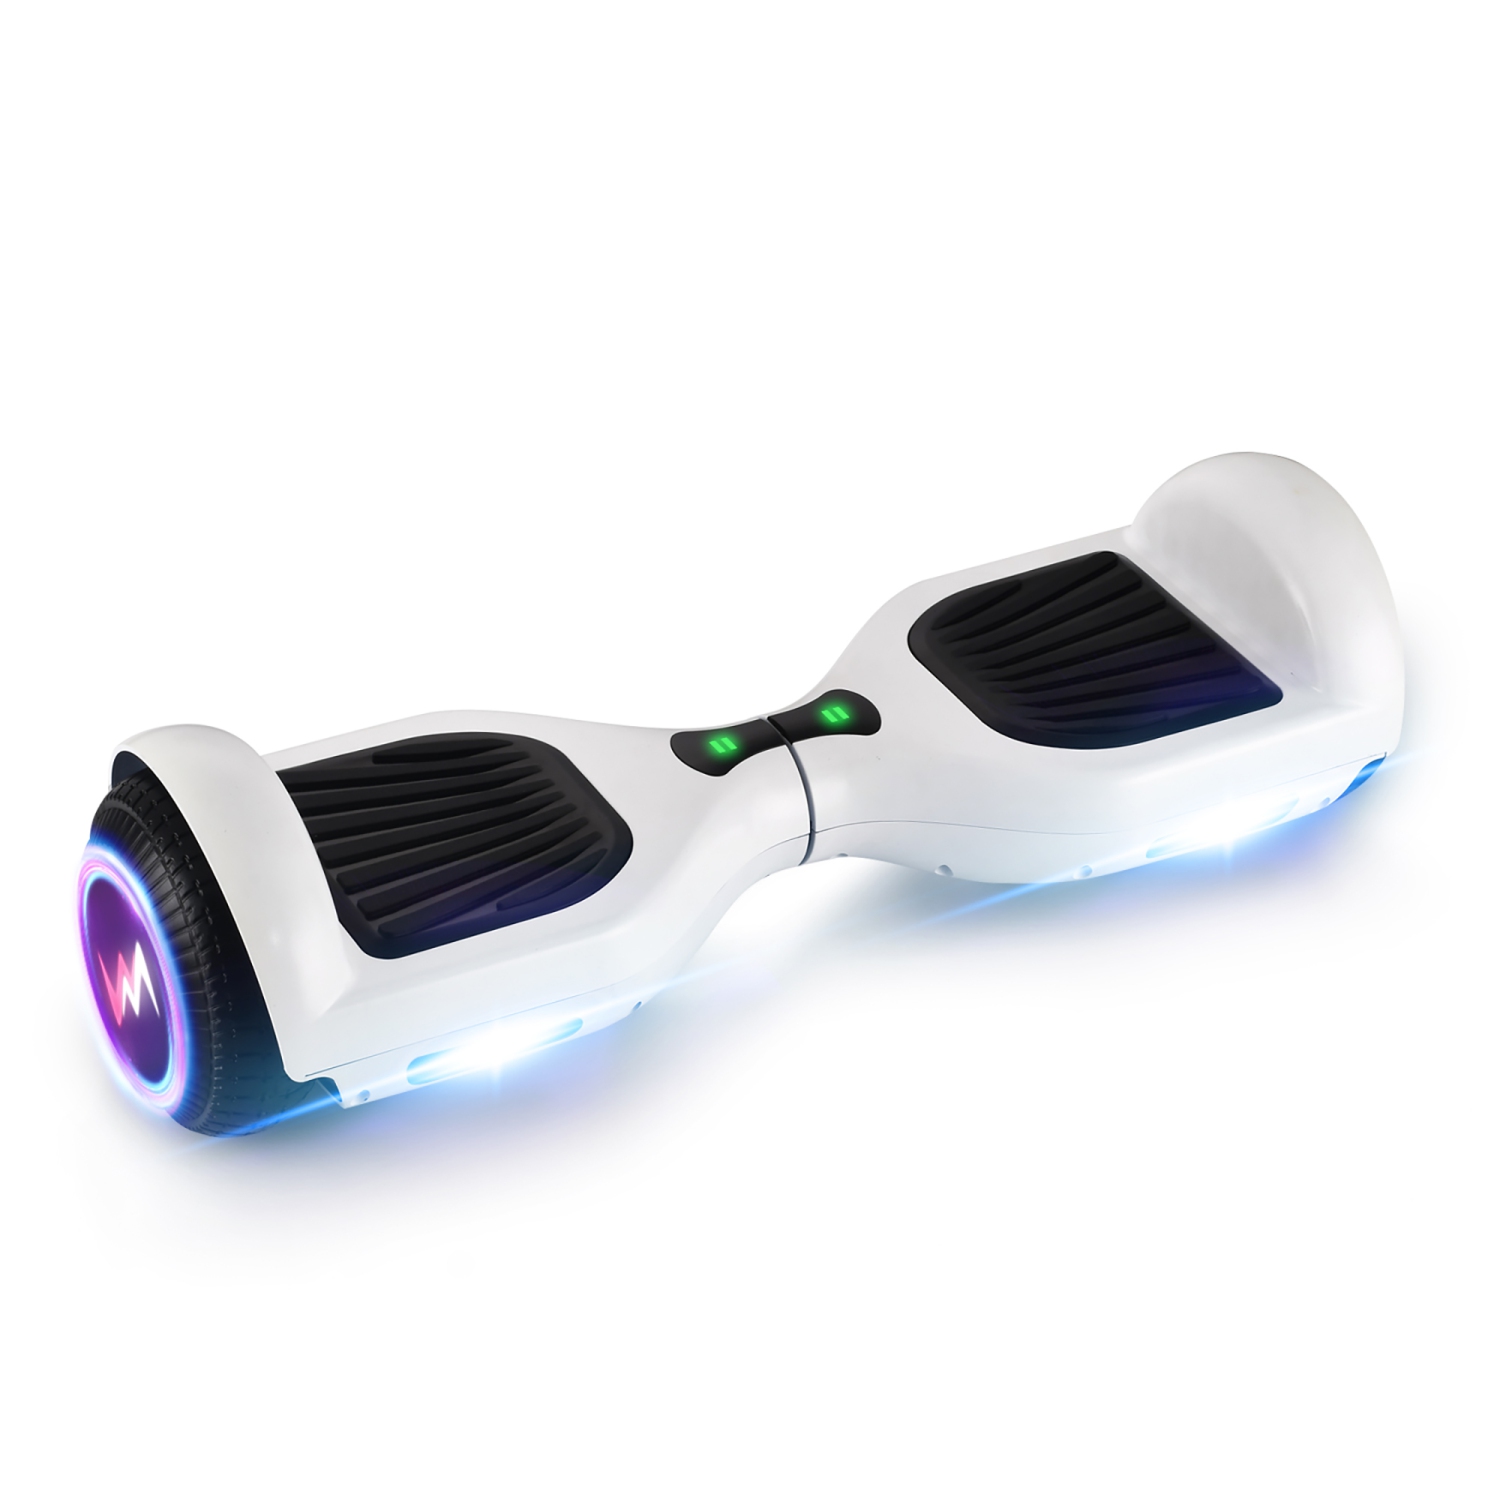 WEELMOTION Classic White Hoverboard with Music Speaker and LED Front Lights & Shining Wheels All Terrain 6.5" UL 2272 Certified Hoverboard with free hover board bag